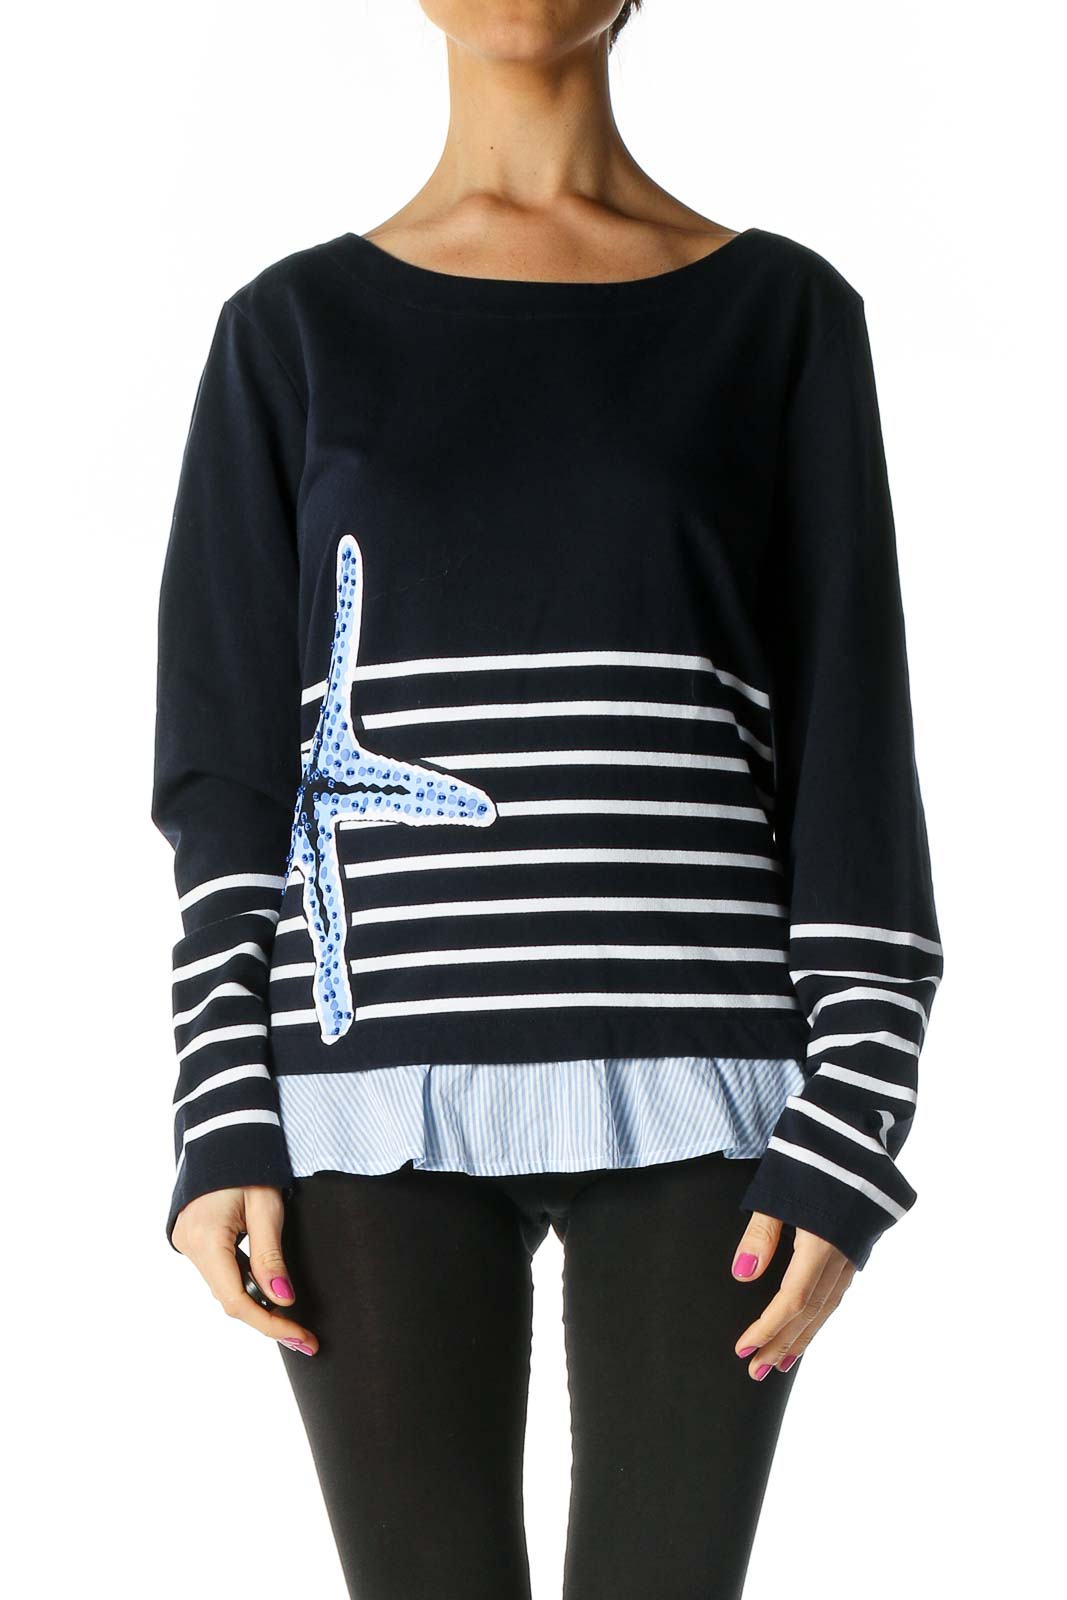 Black Striped Casual Sweater Front